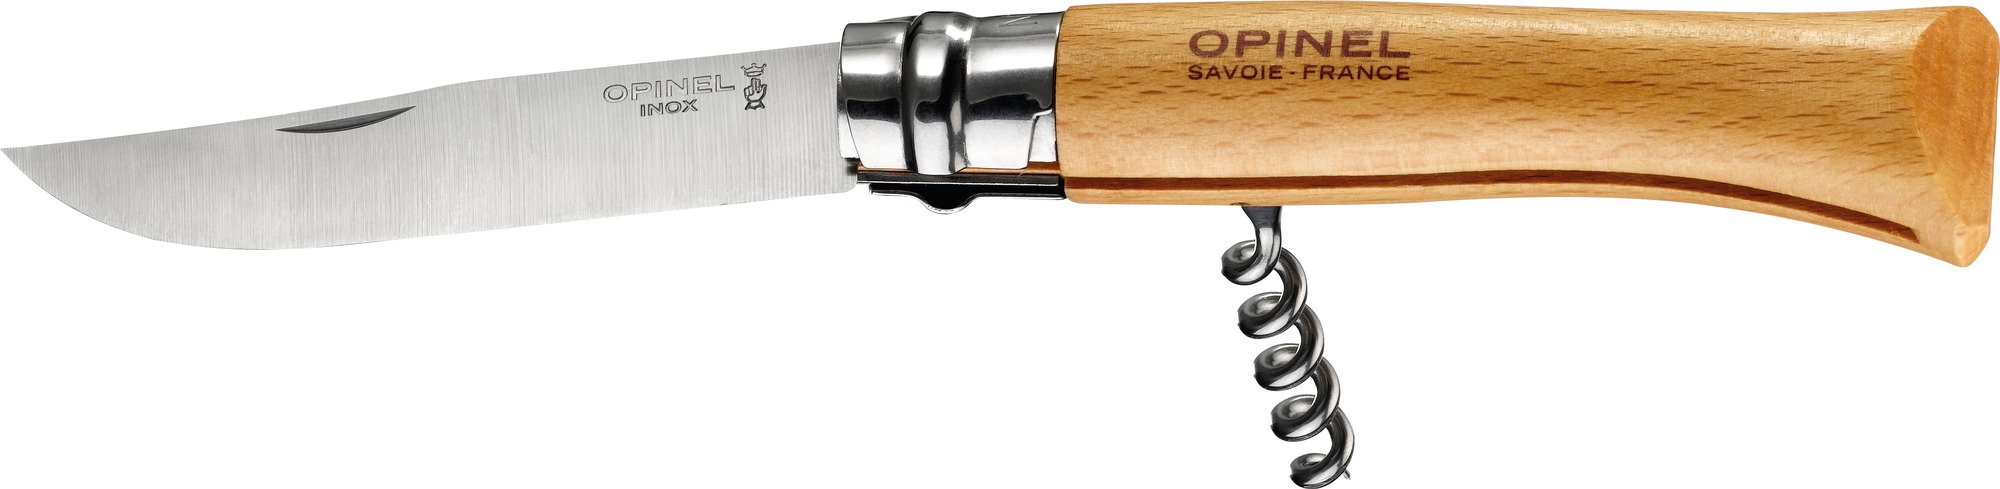 Couteau tire bouchon Opinel - Lame inox N°10